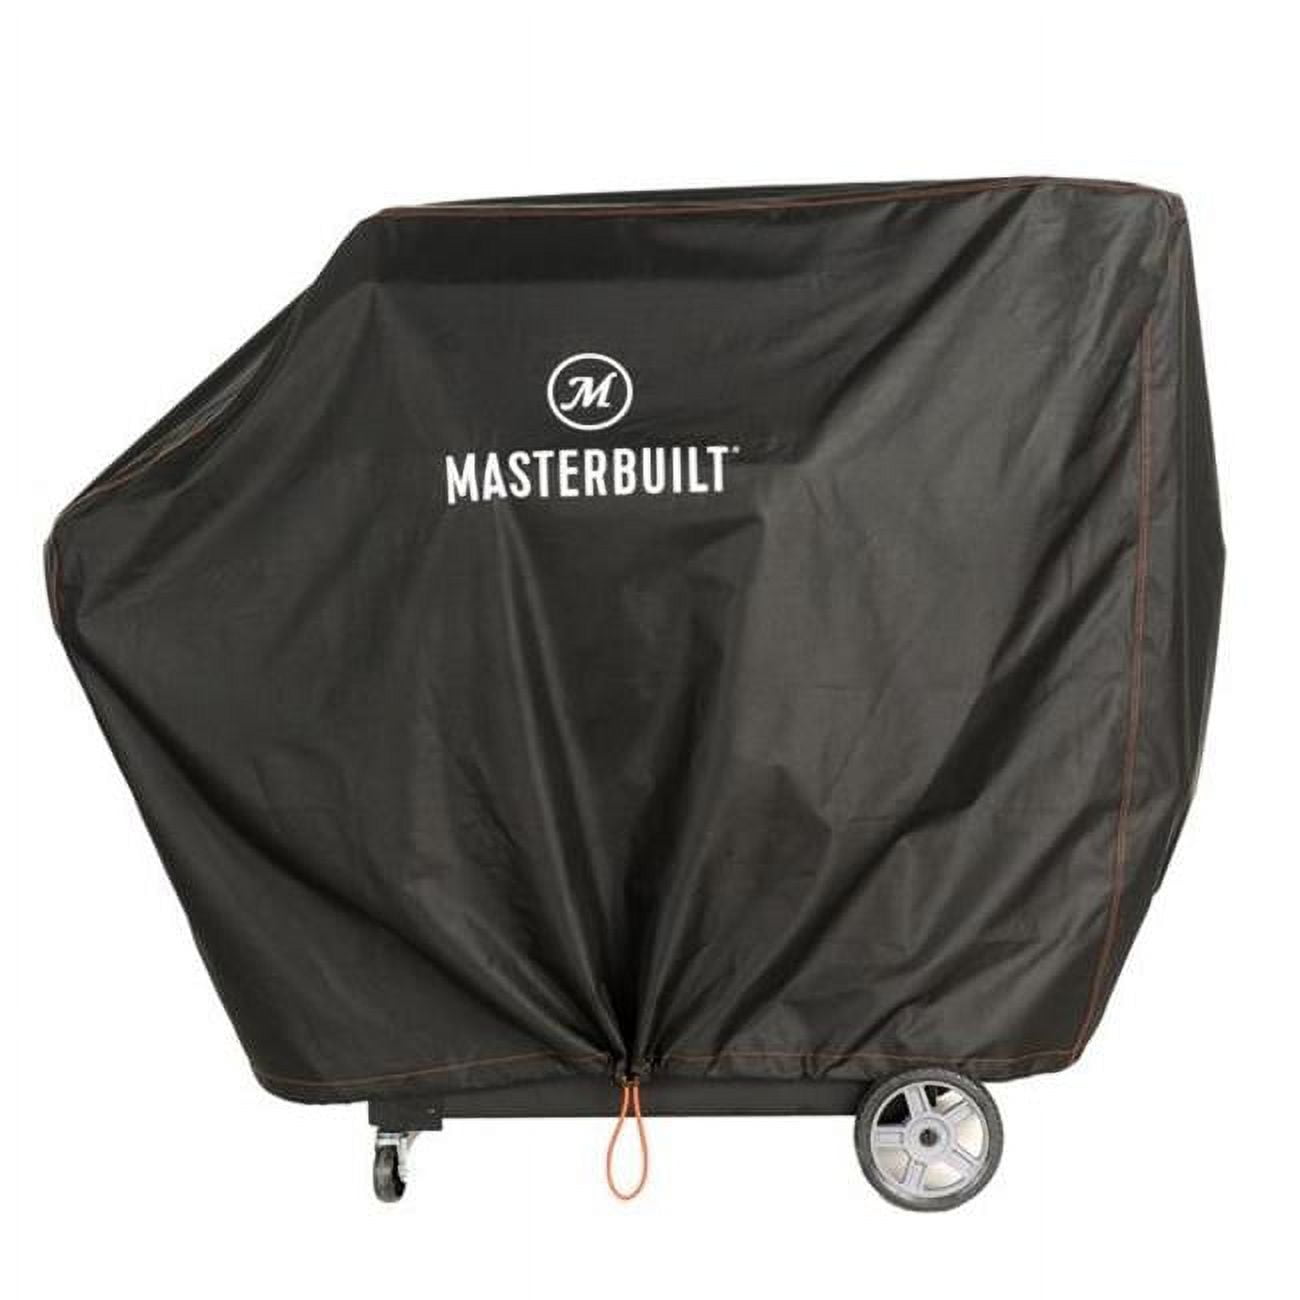 Masterbuilt Manufacturing  61.02 in. Gravity Series 1050 Grill Cover, Black -  MA8419